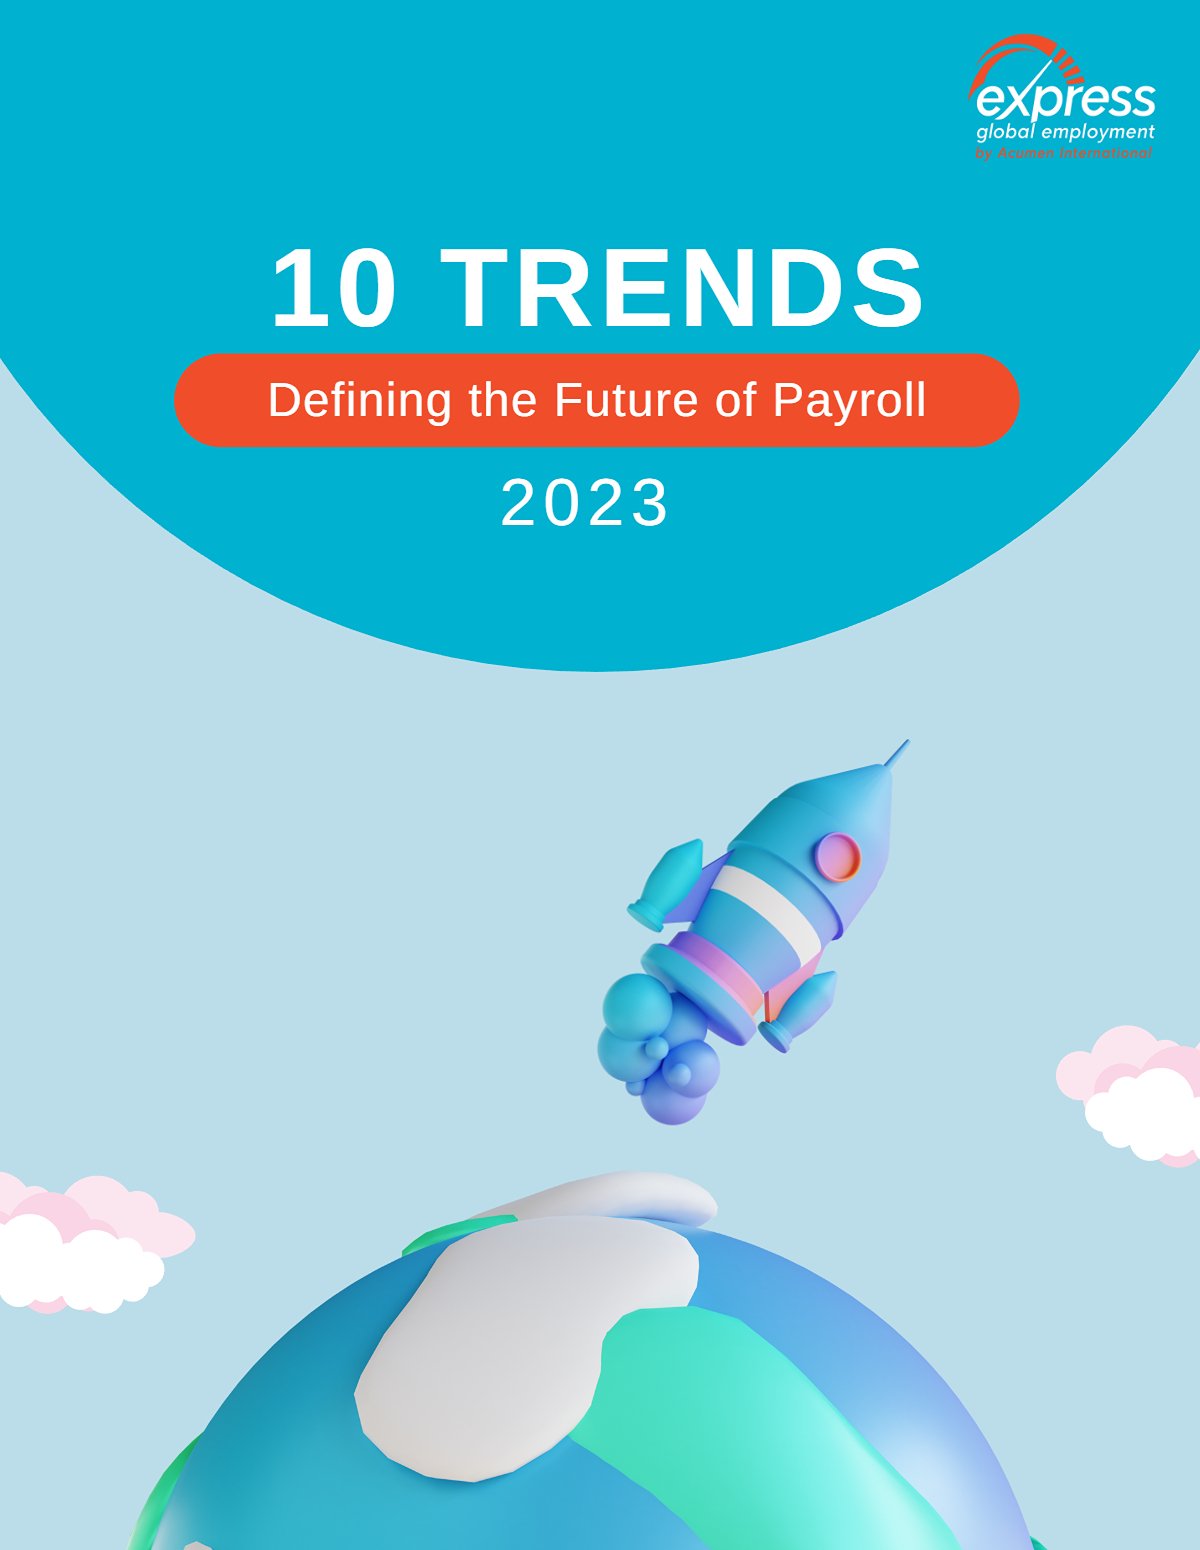 10 Future Trends Shaping Global Payroll: Stay Ahead of the Payroll Landscape Transformative Shifts